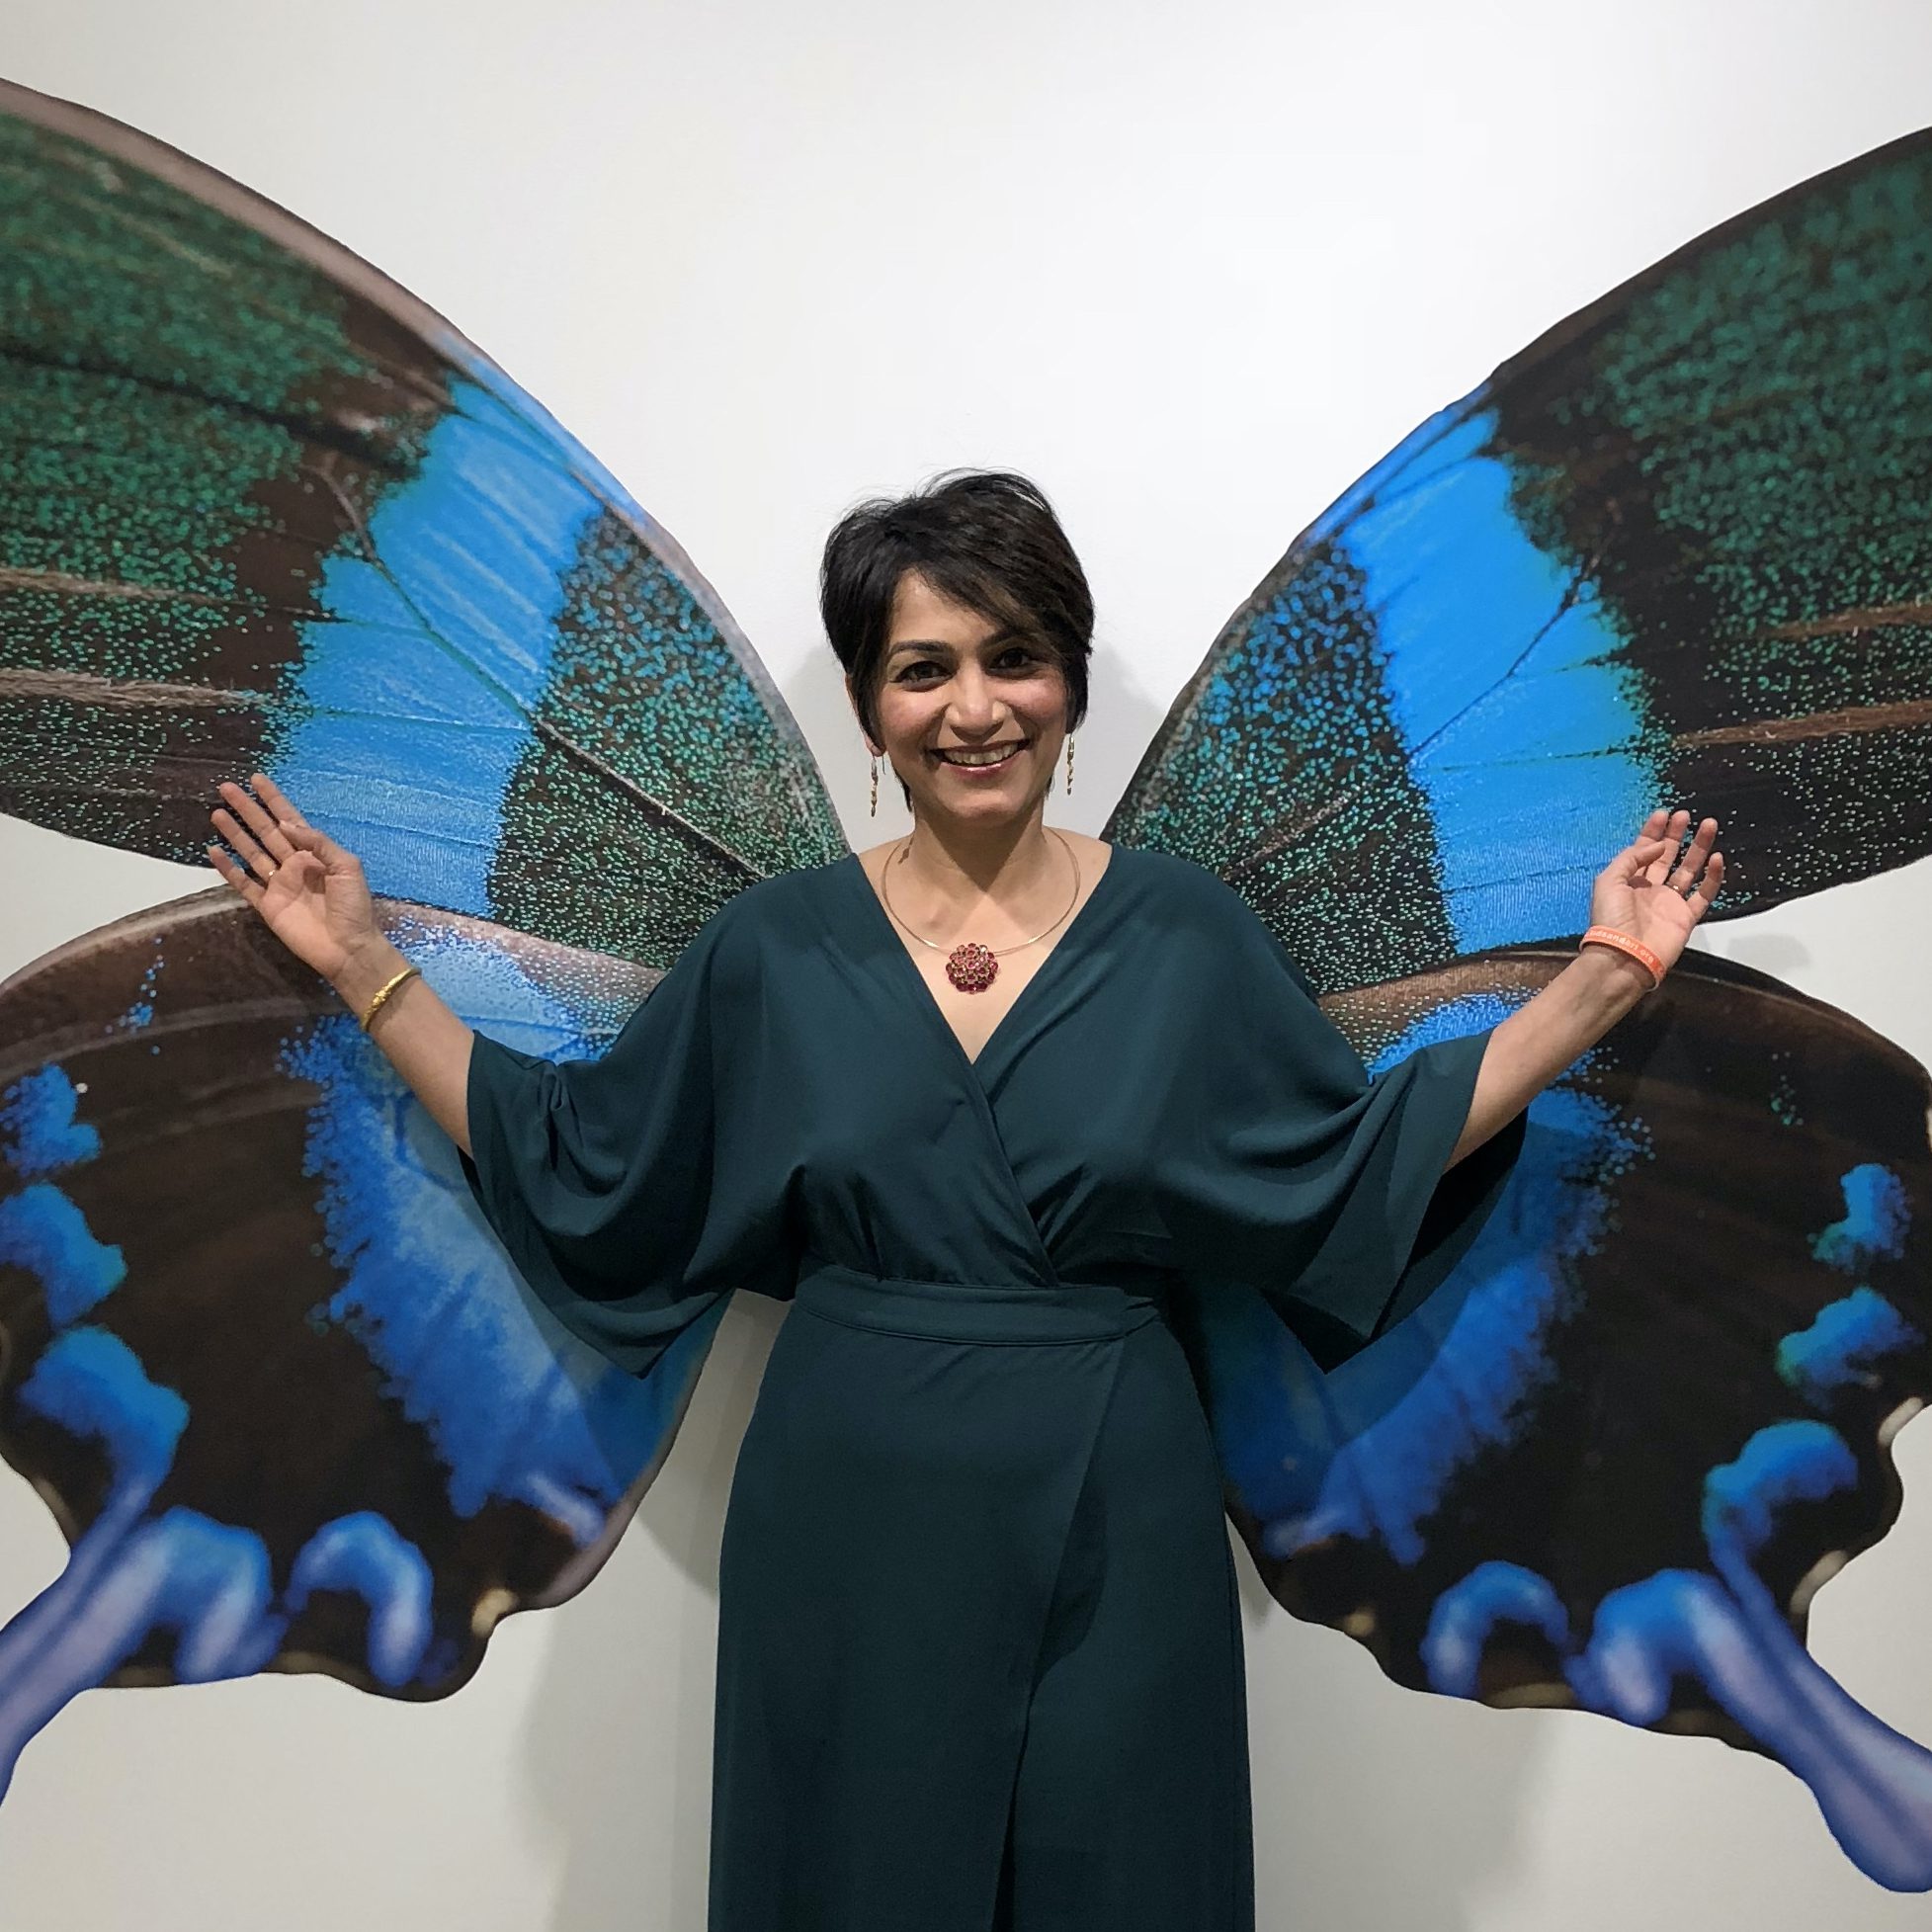 image: purvi shah wearing blue, standing in front of wall with butterfly mural